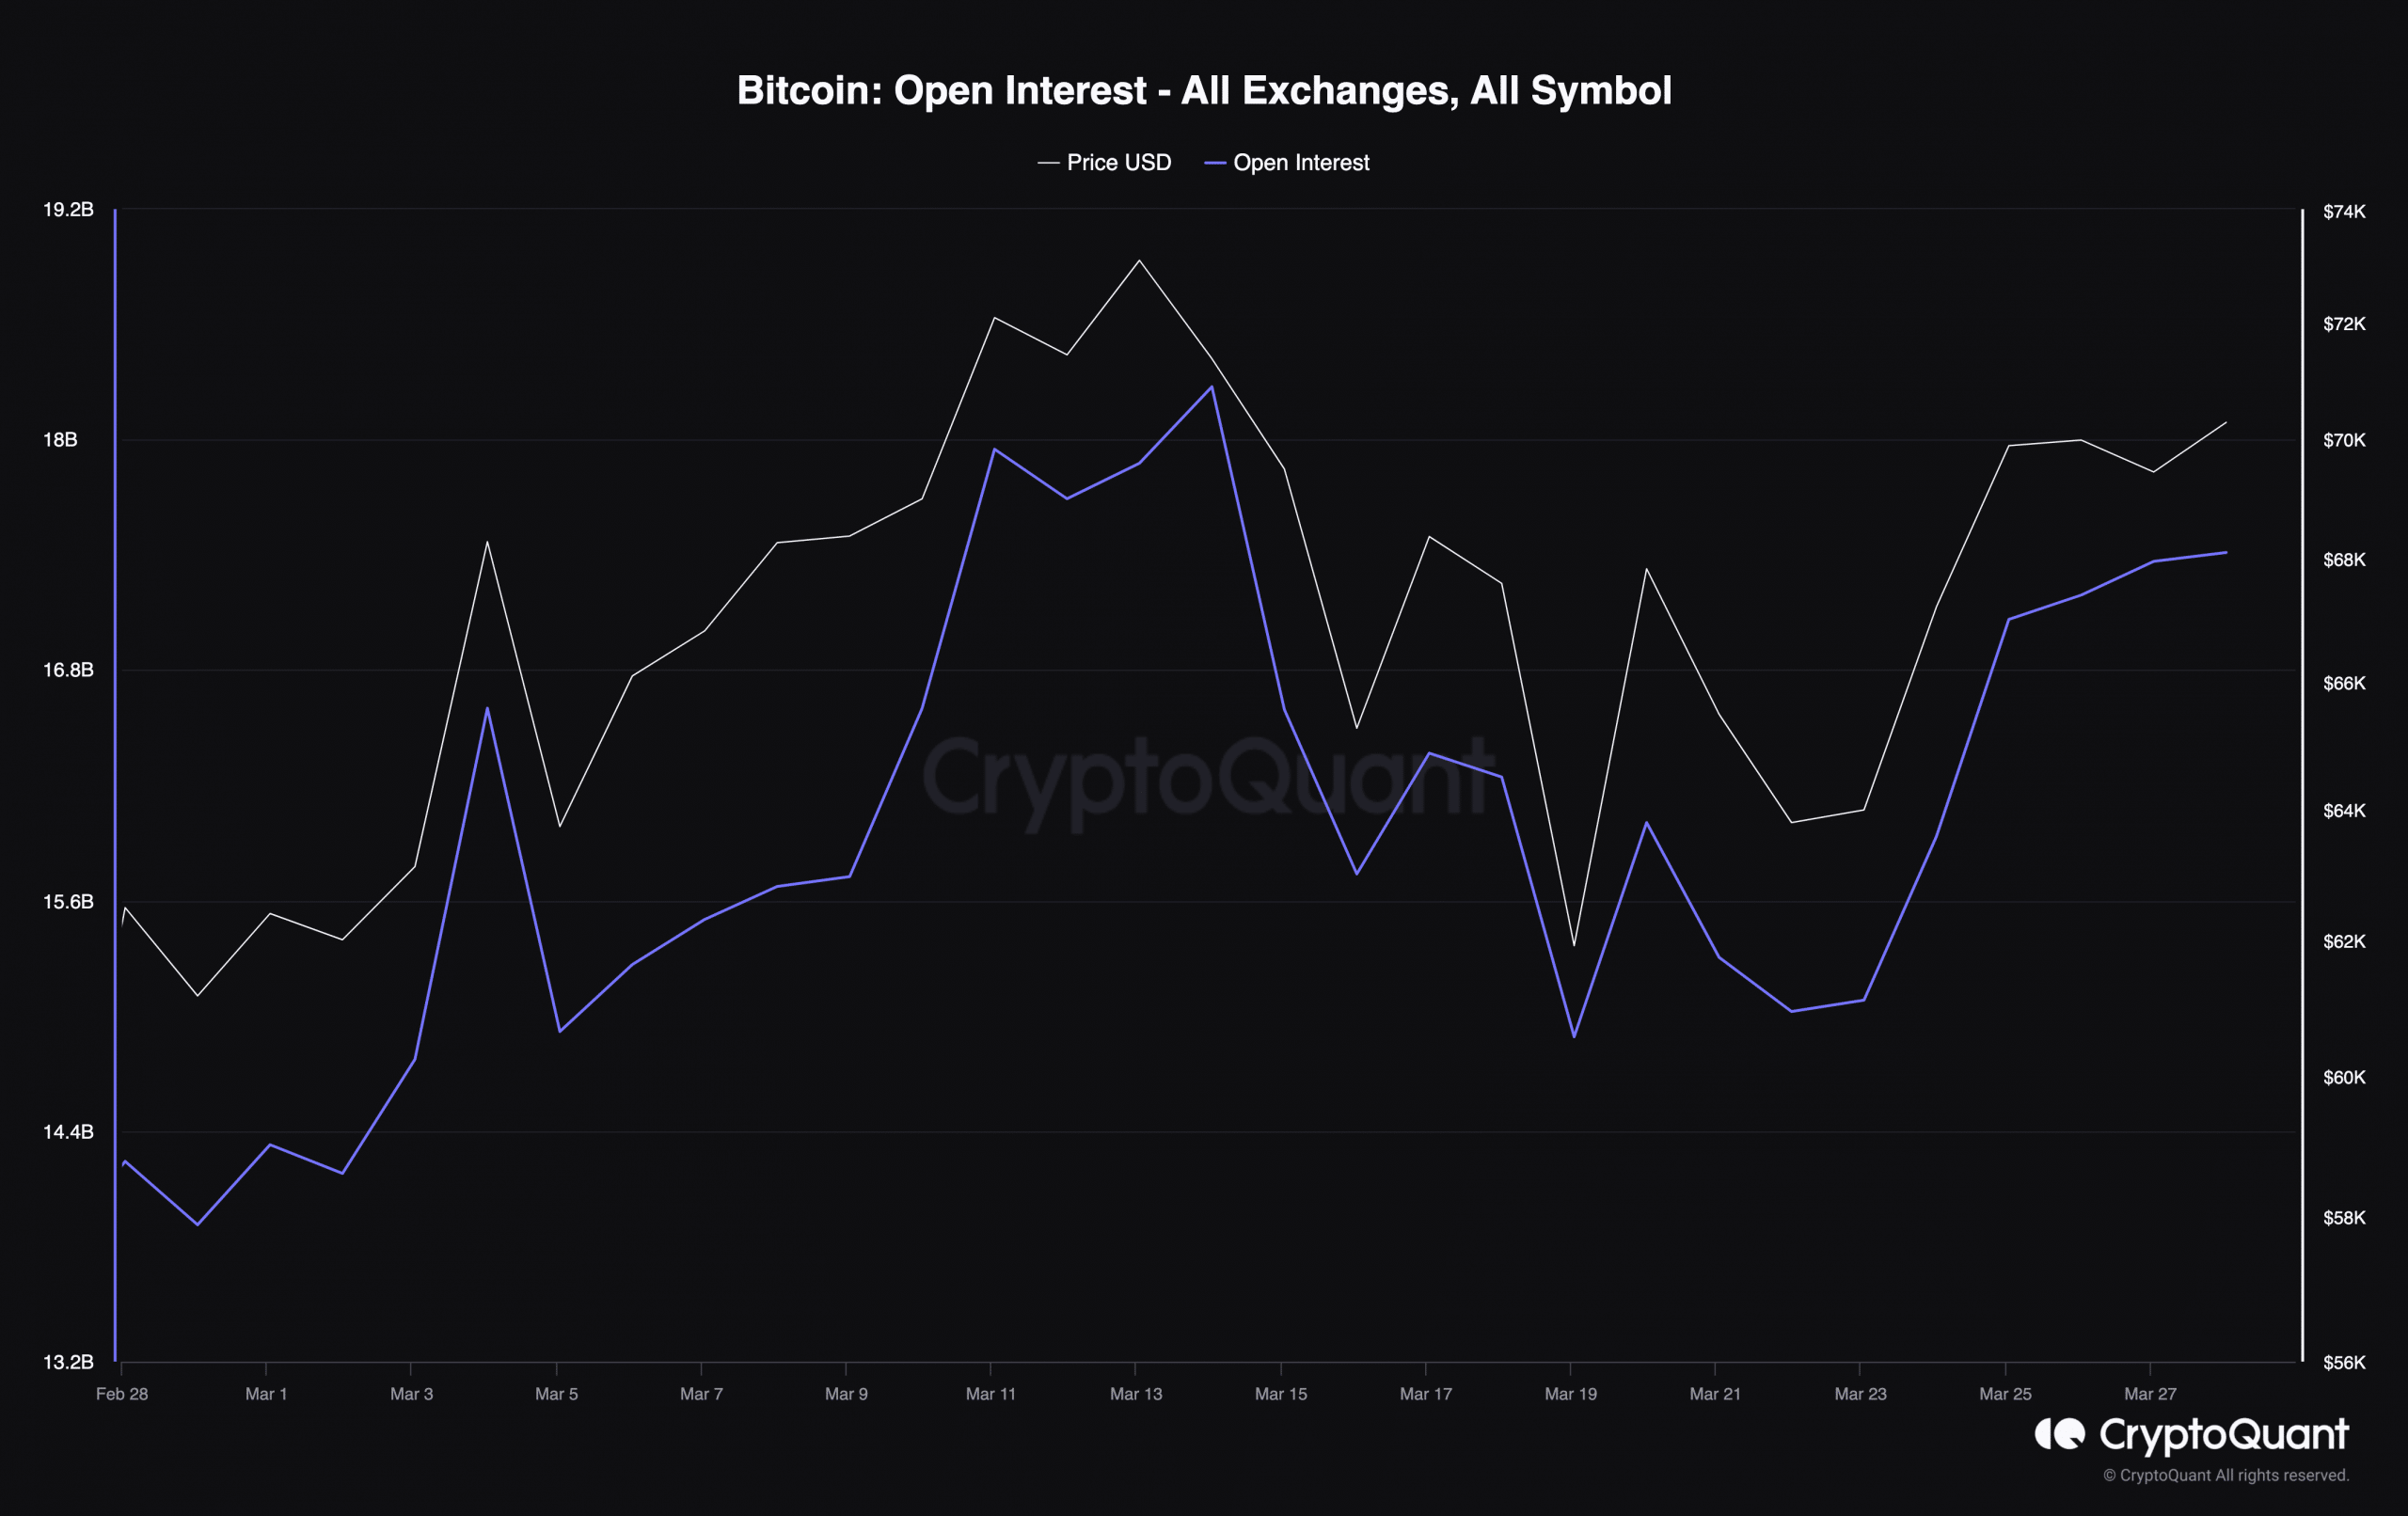 Bitcoin's rising open interest, indicating a possible price surge